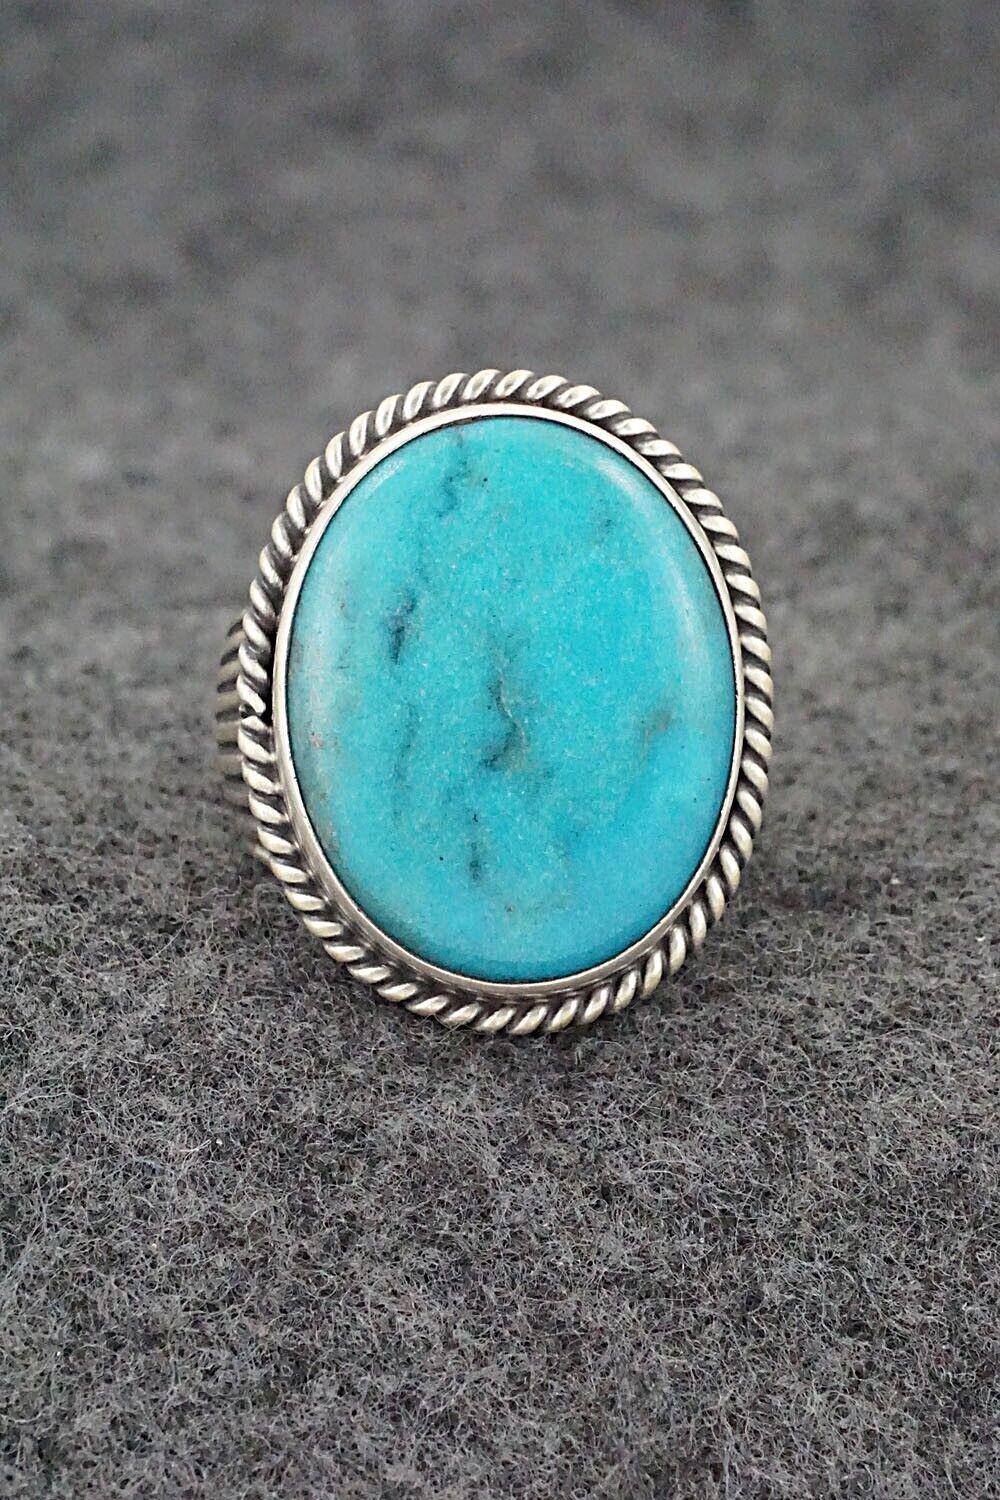 Turquoise & Sterling Silver Ring - Samuel Yellowhair - Size 6.75